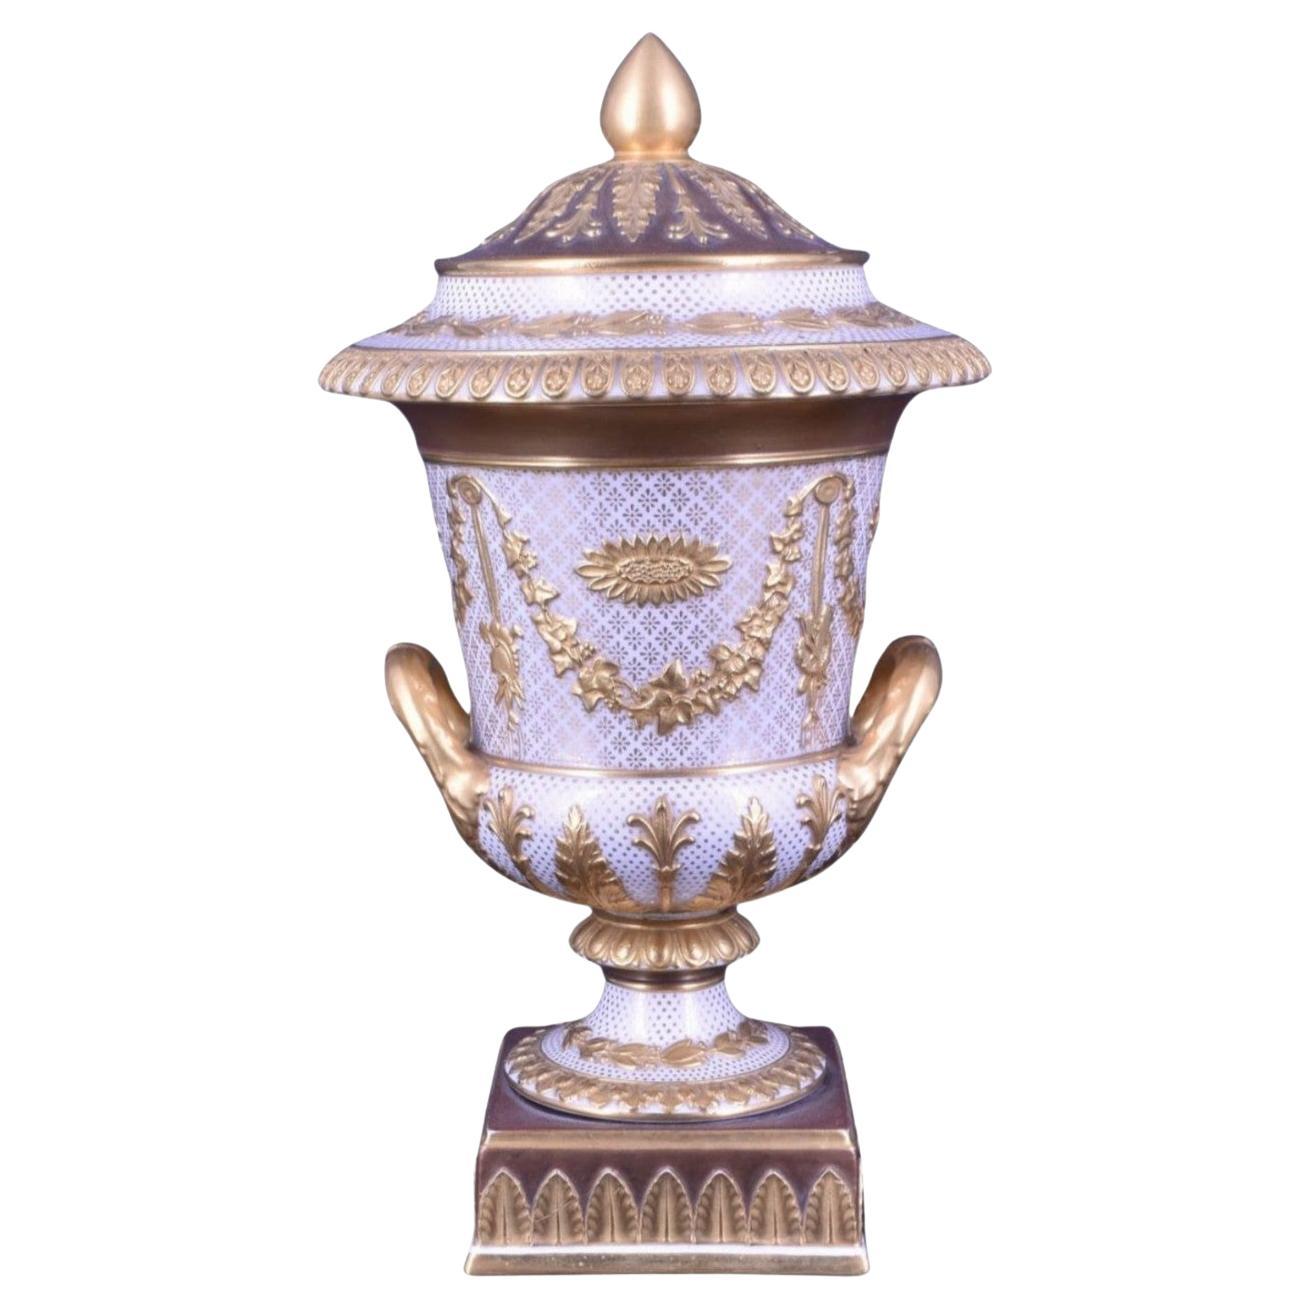 Victoriaware campana Vase in White with Gilt Decoration. Wedgwood C1880. For Sale